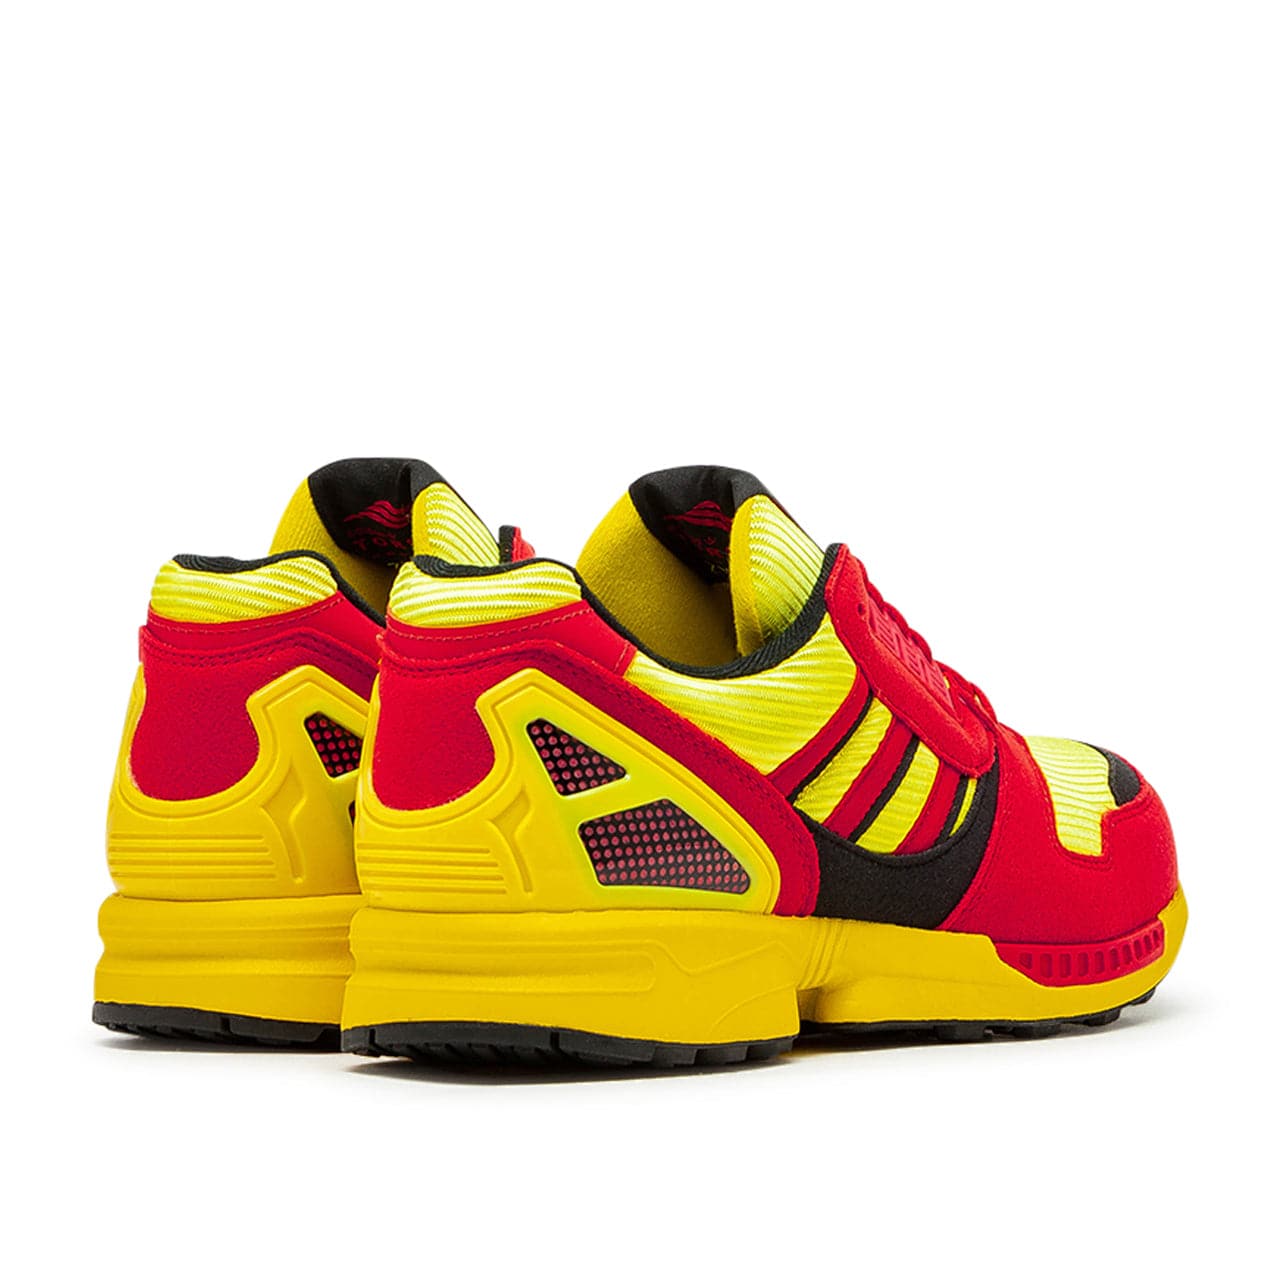 adidas ZX 8000 Germany 'Bring Back Pack' (Gelb / Rot / Schwarz)  - Allike Store